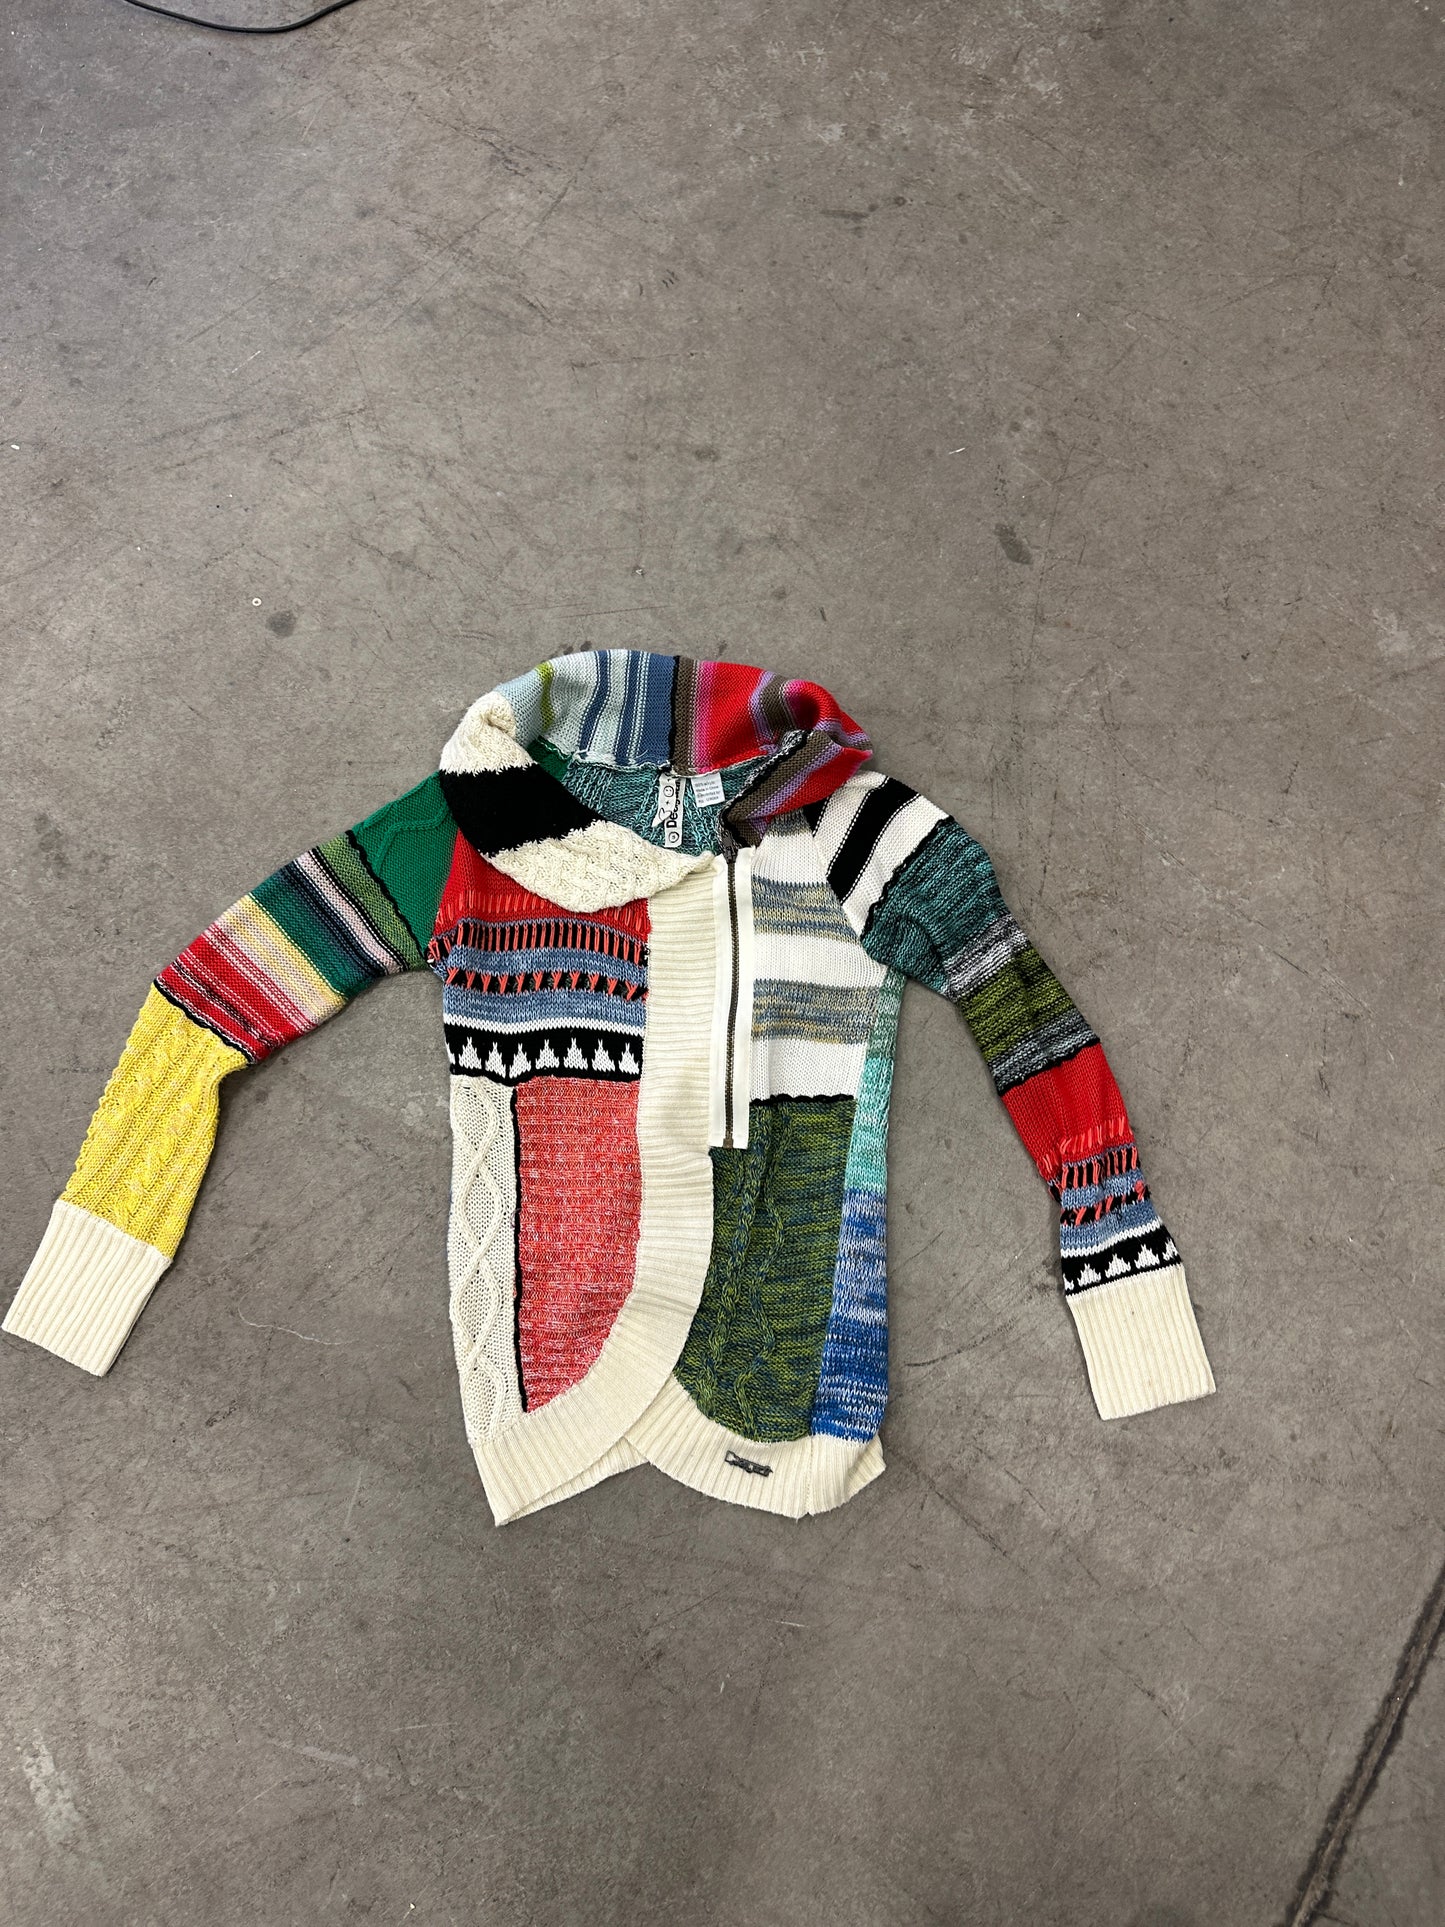 Knit “Why” Sweater